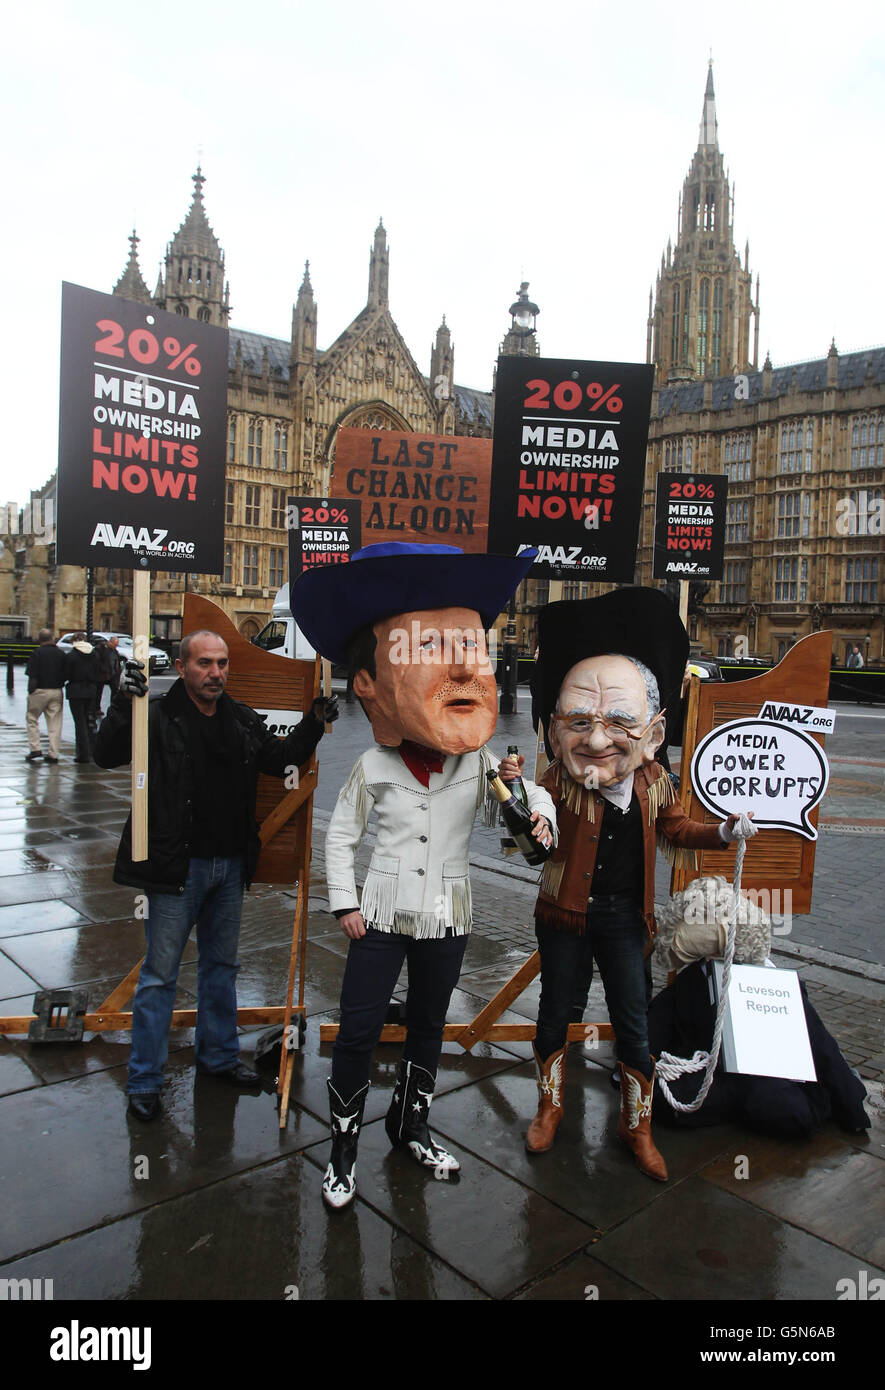 Protest group Avaaz outside the House of Parliament to protest against media ownership and the implementation of the Leveson Inquiry report. Stock Photo